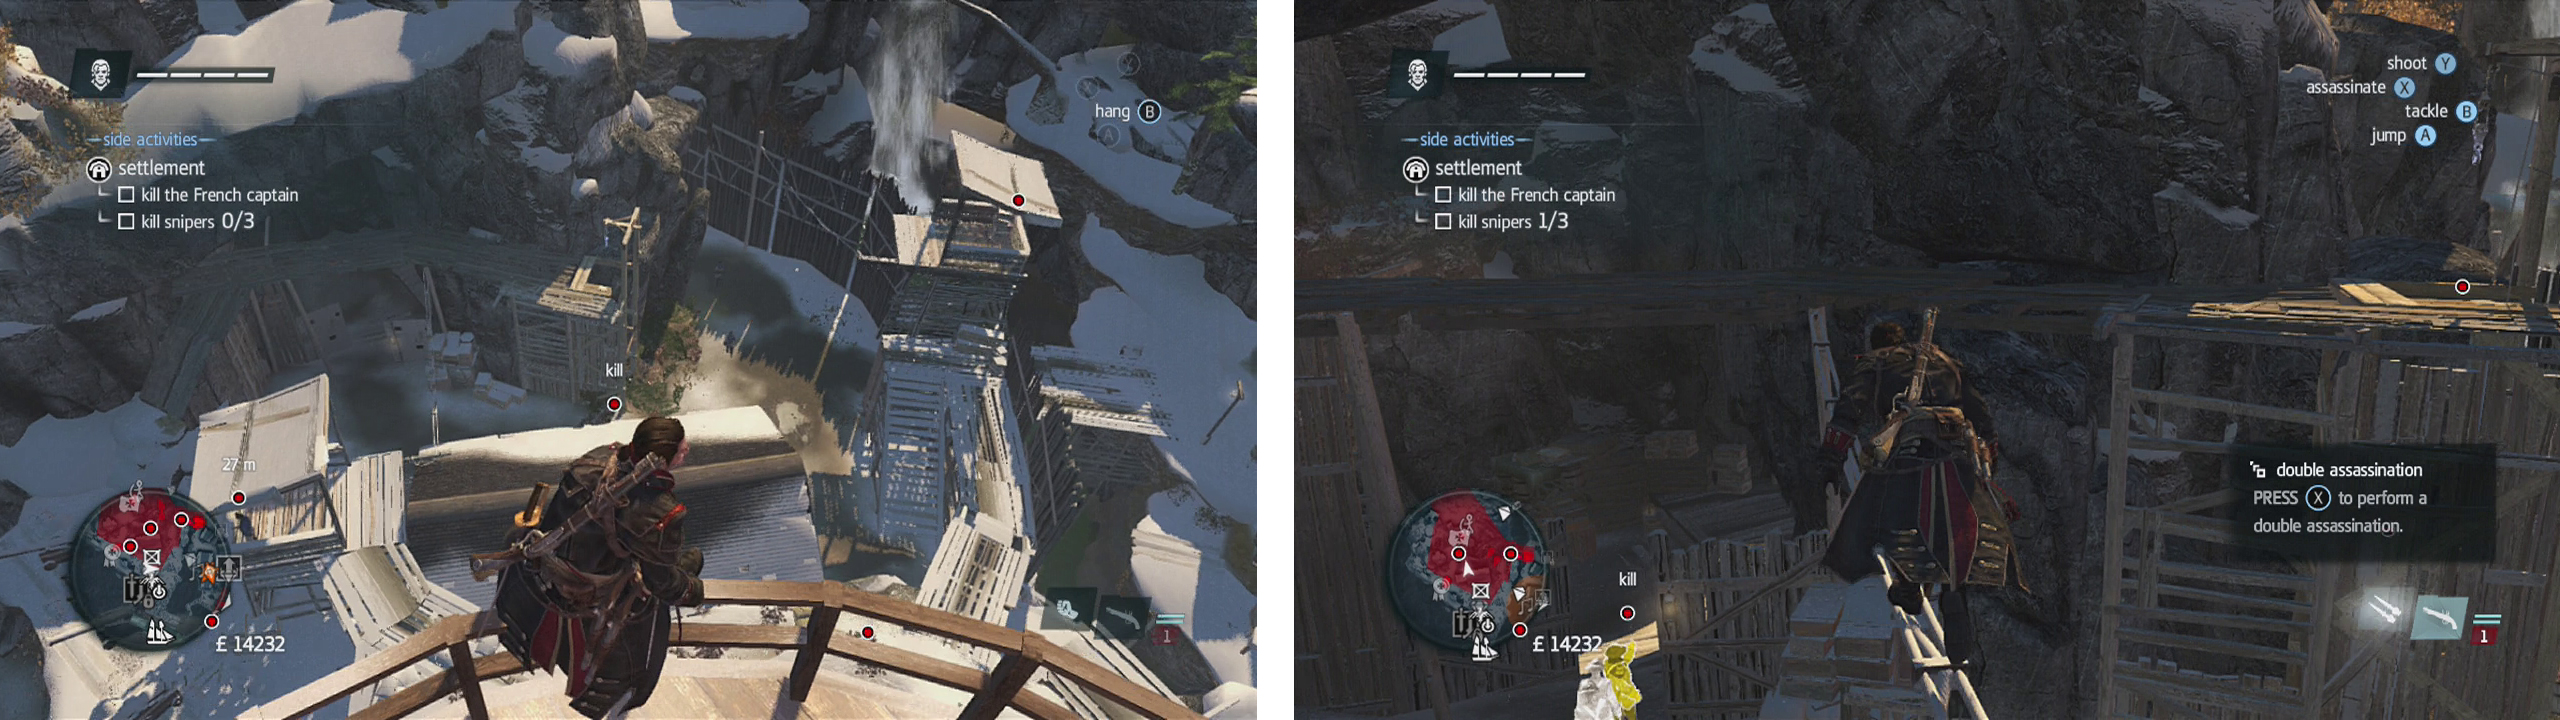 From the viewpoint you can make out the first two snipers (left). The captain patrols below them (right).